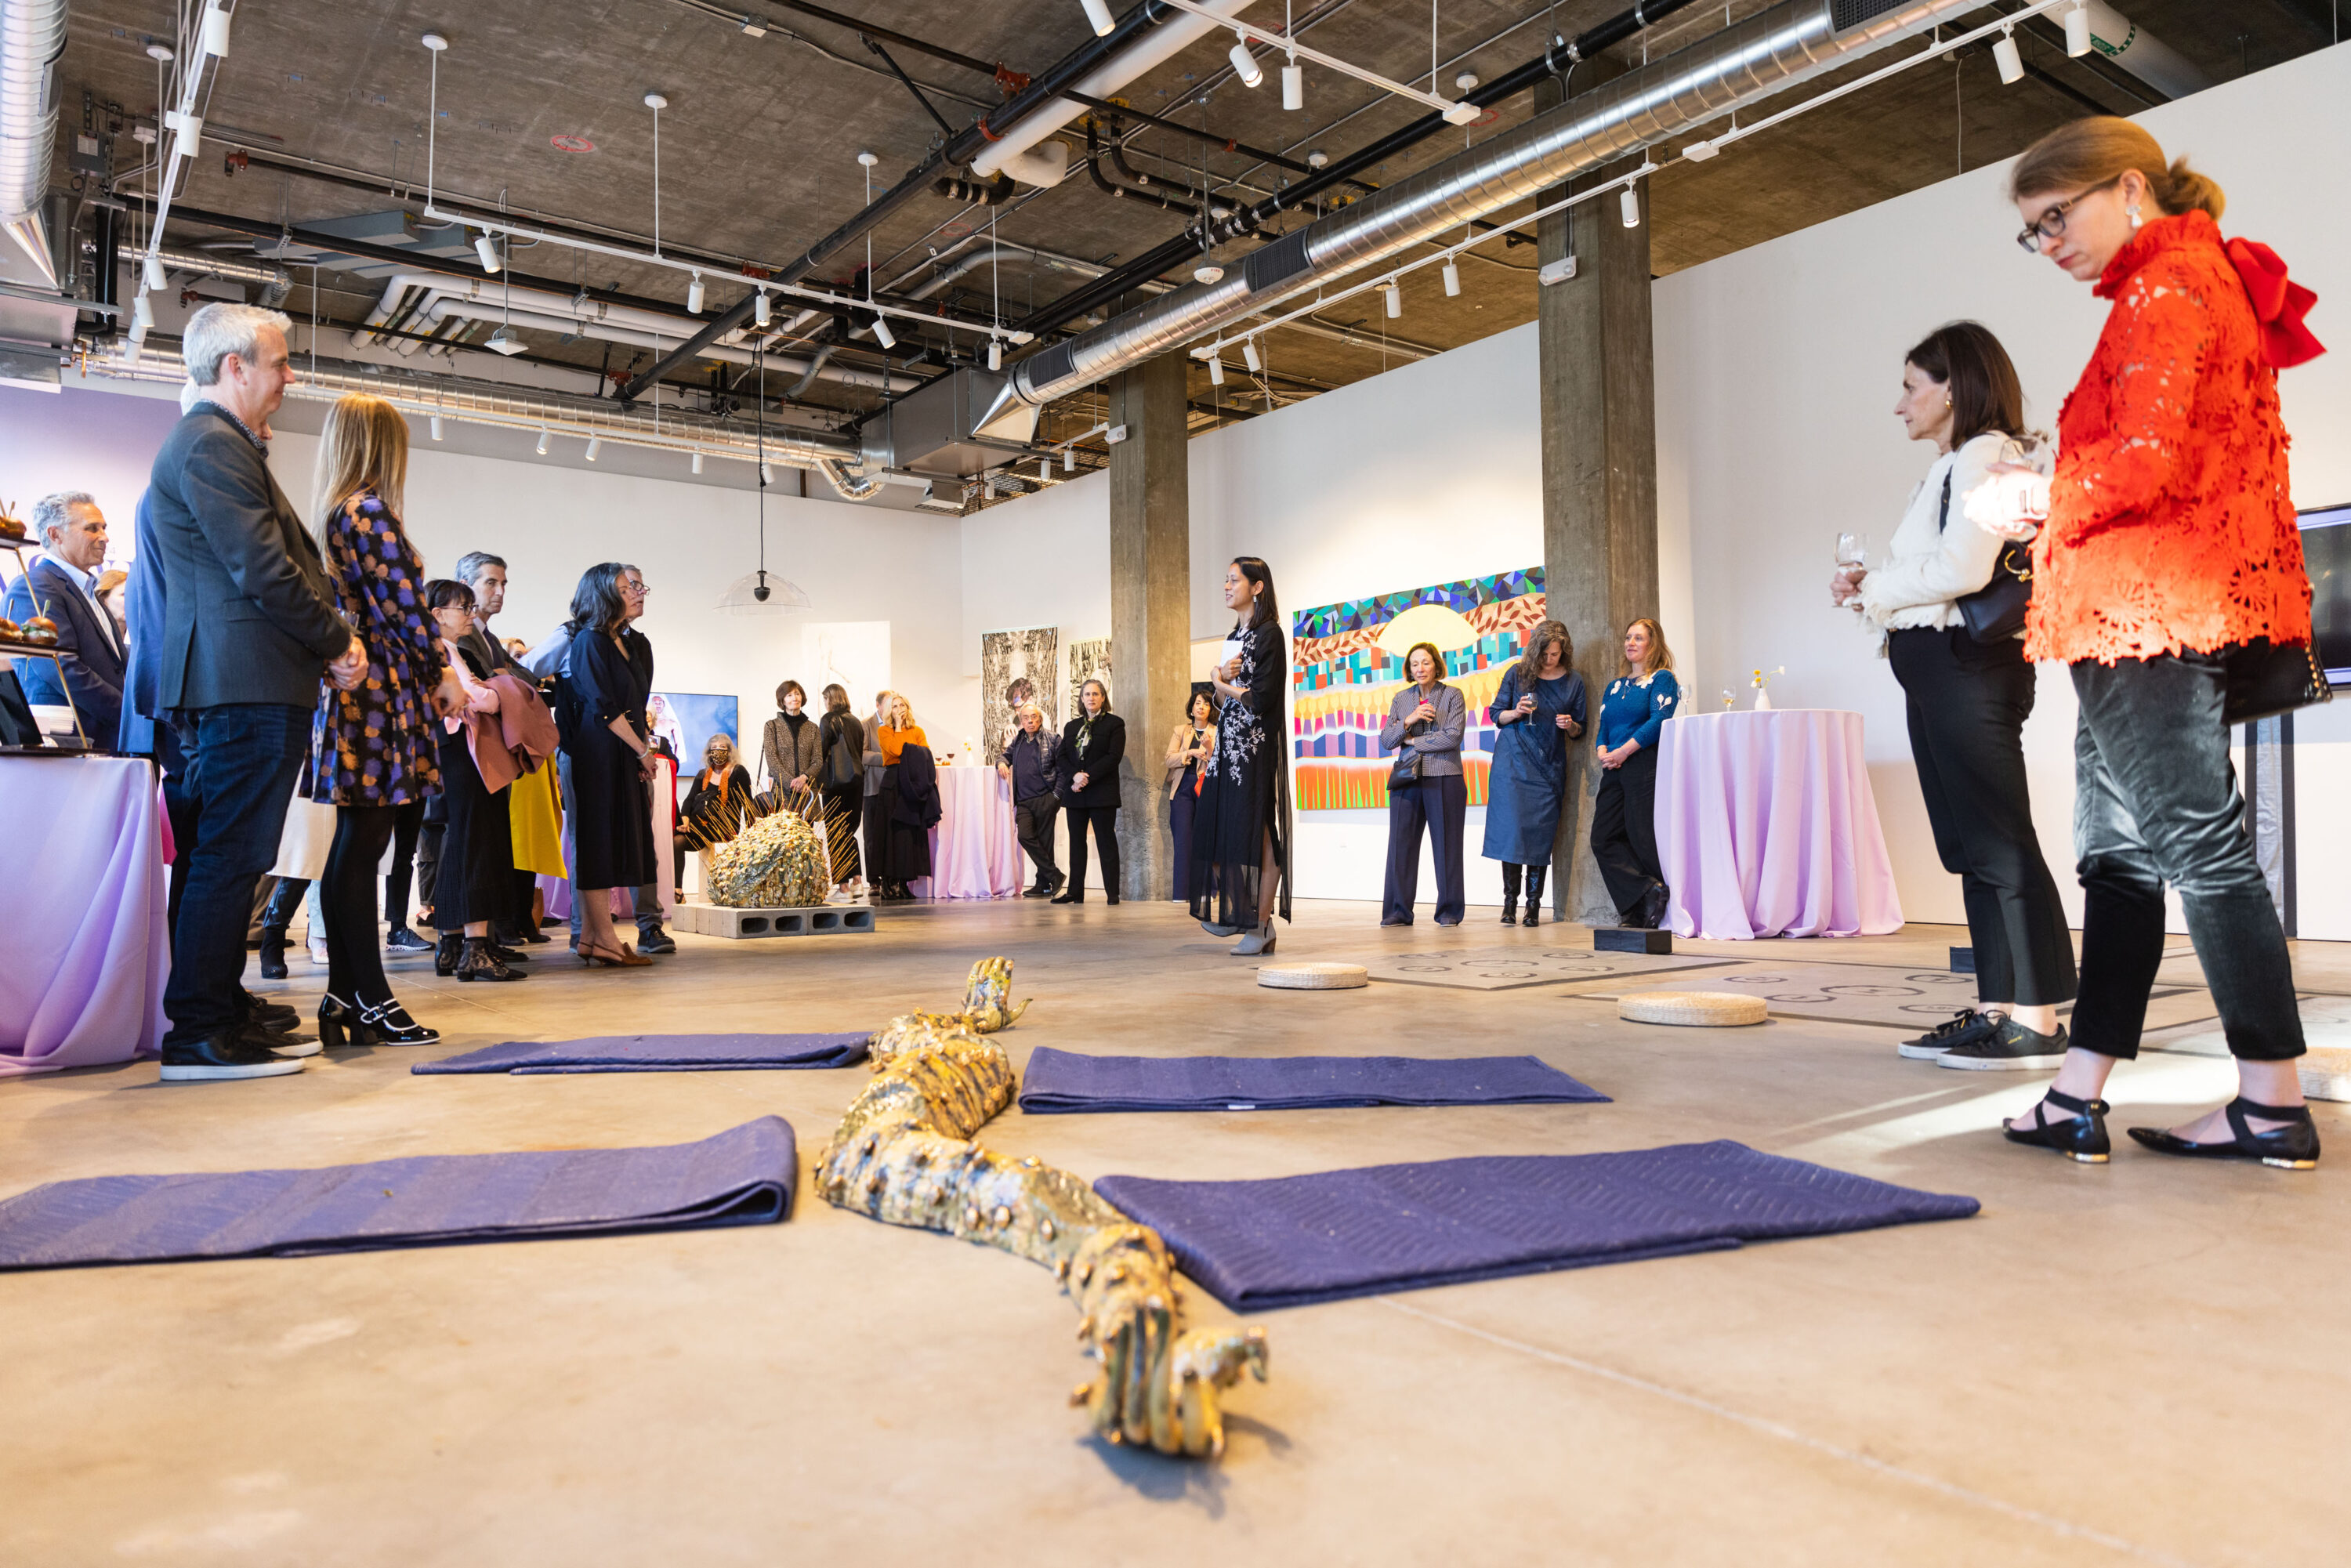 A large group attends an event in a gallery filled with colorful works on the walls and a large sculptural work in the middle of the floor. One figure stands in the middle of the room speaking to the group.